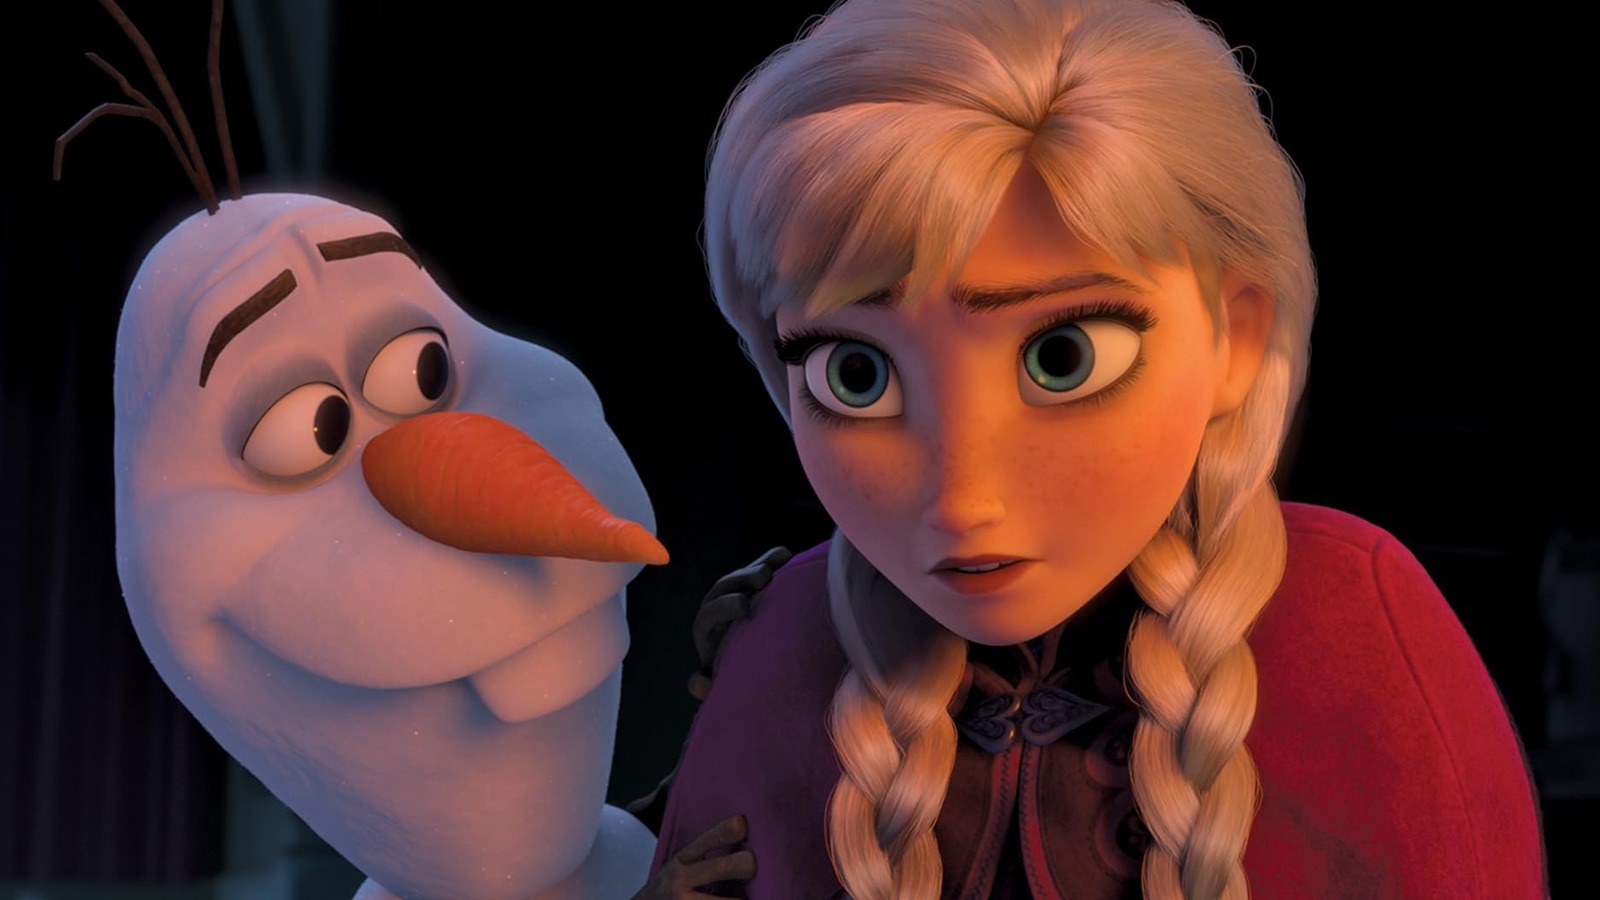 Frozen 4 Is Officially Happening (And Yes, Frozen 3 Hasn’t Even Come Out Yet)